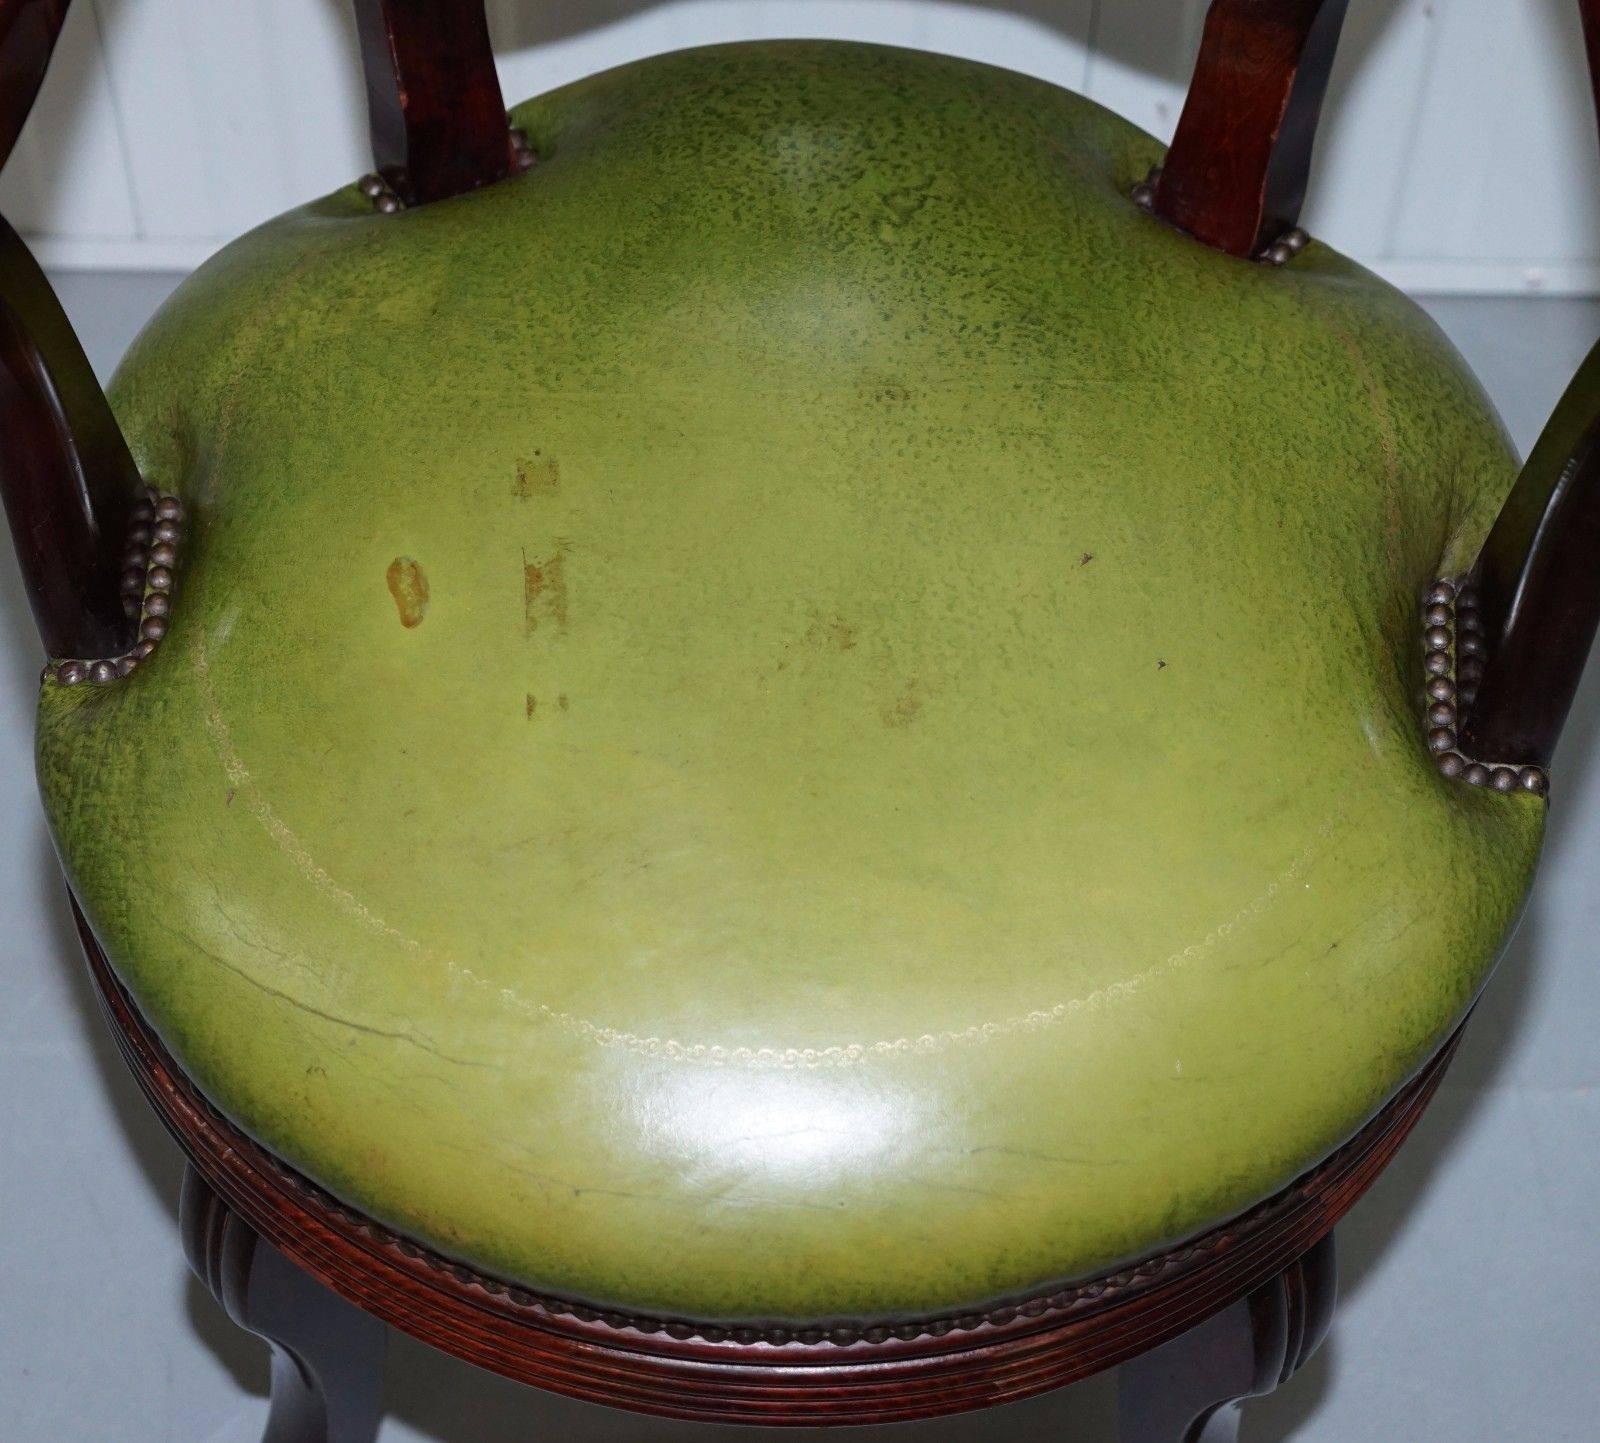 vintage green leather office chair